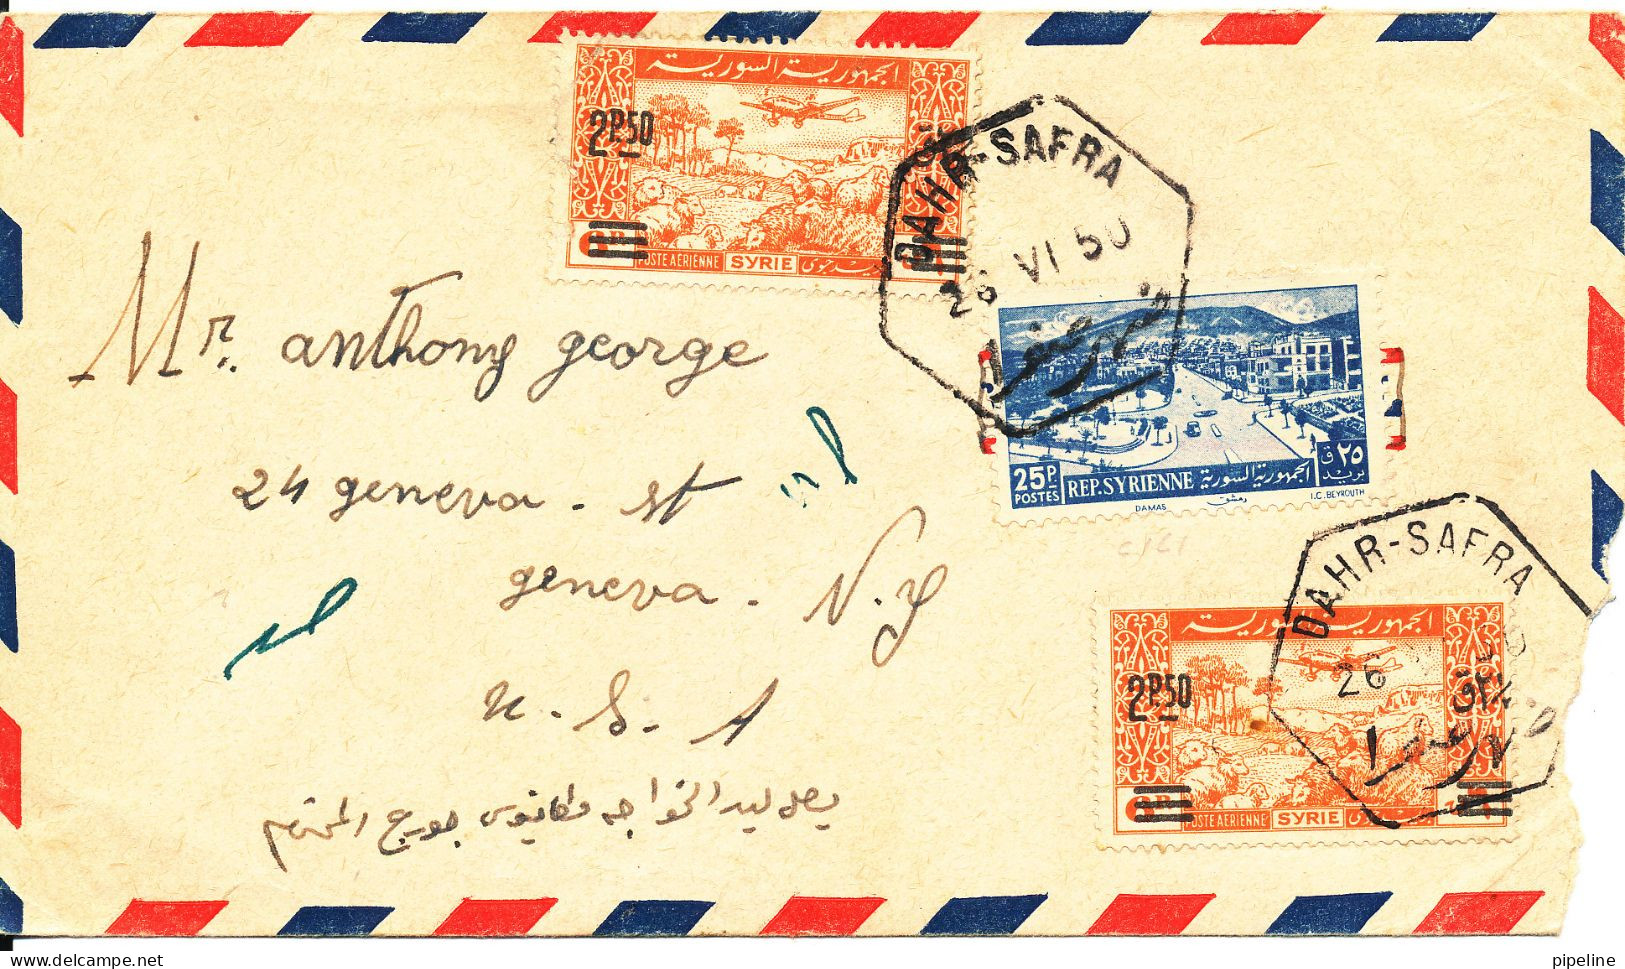 Syria Air Mail Cover Sent To USA Dahr Safra 26-6-1950 Overprinted Stamps The Cover Is Damaged In The Right Side - Siria